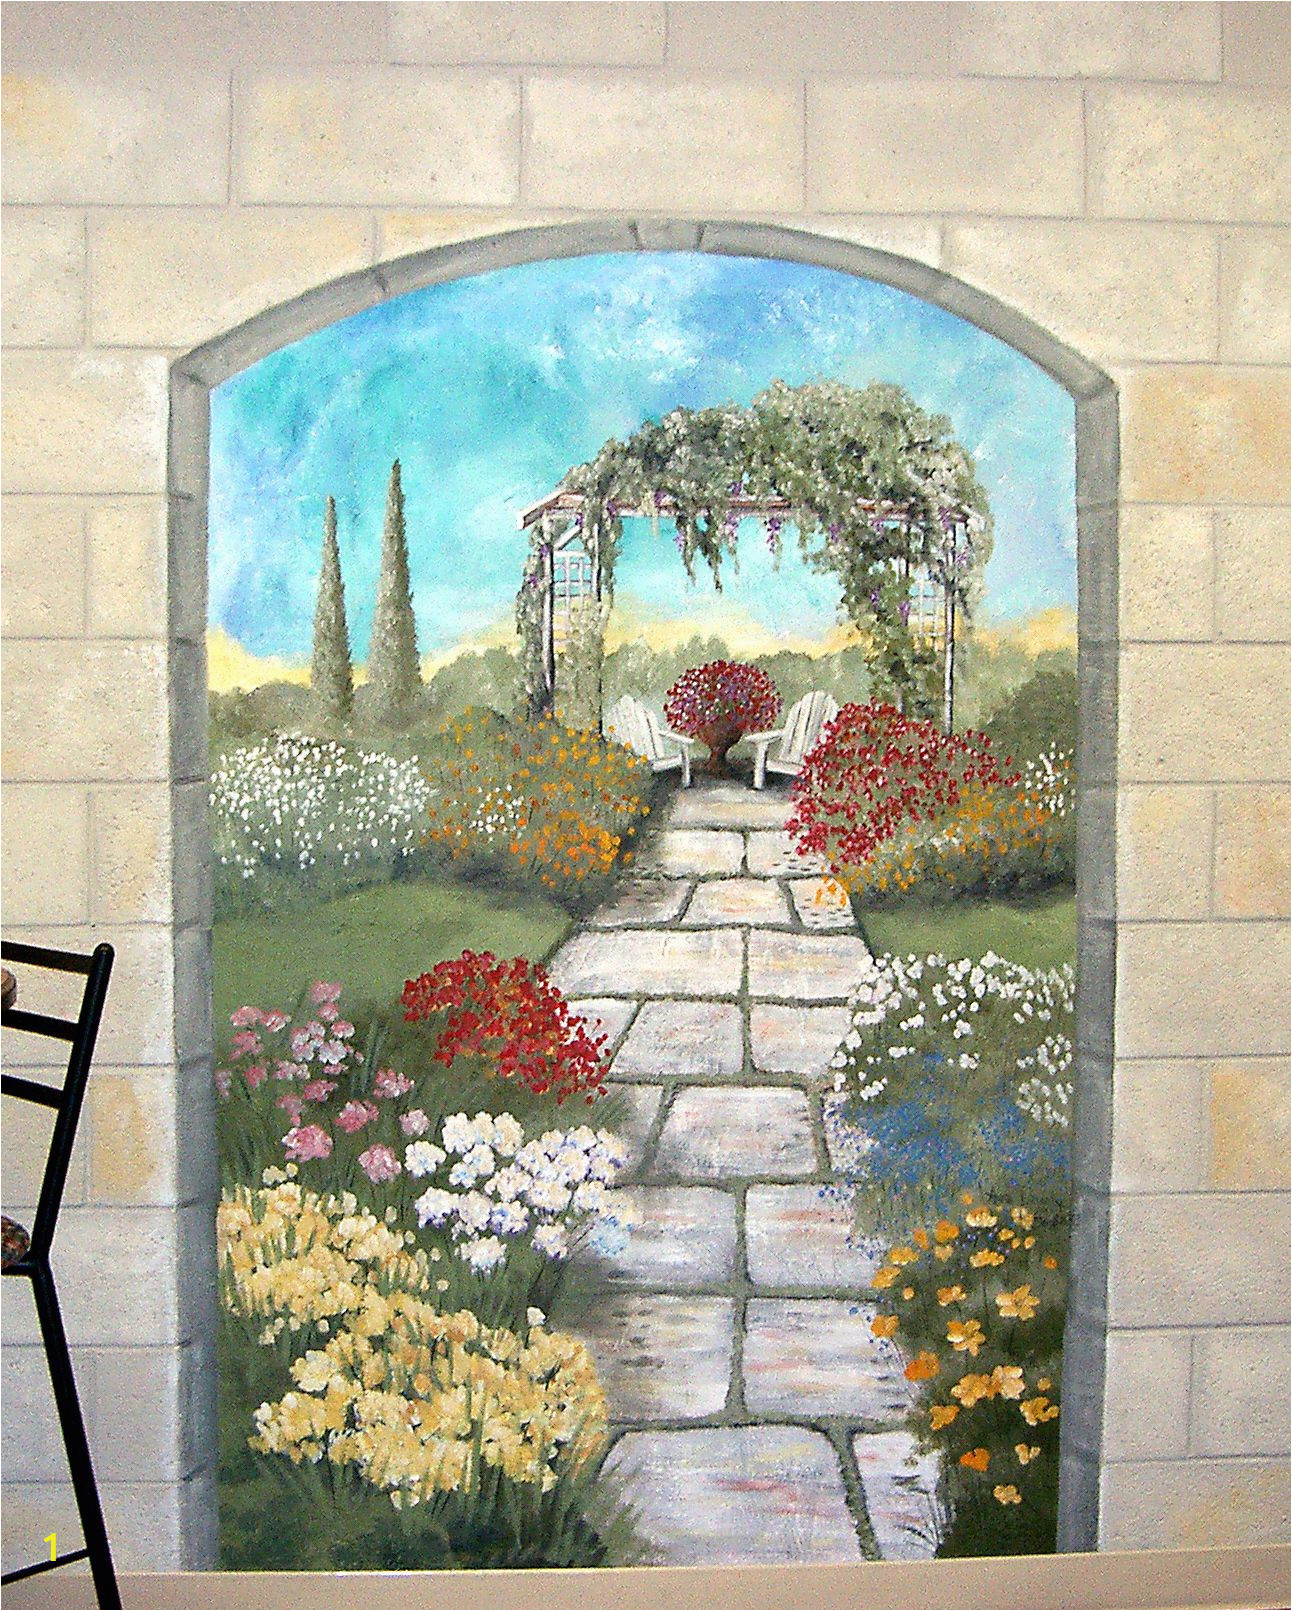 How to Do Mural Painting On Wall Garden Mural On A Cement Block Wall Colorful Flower Garden